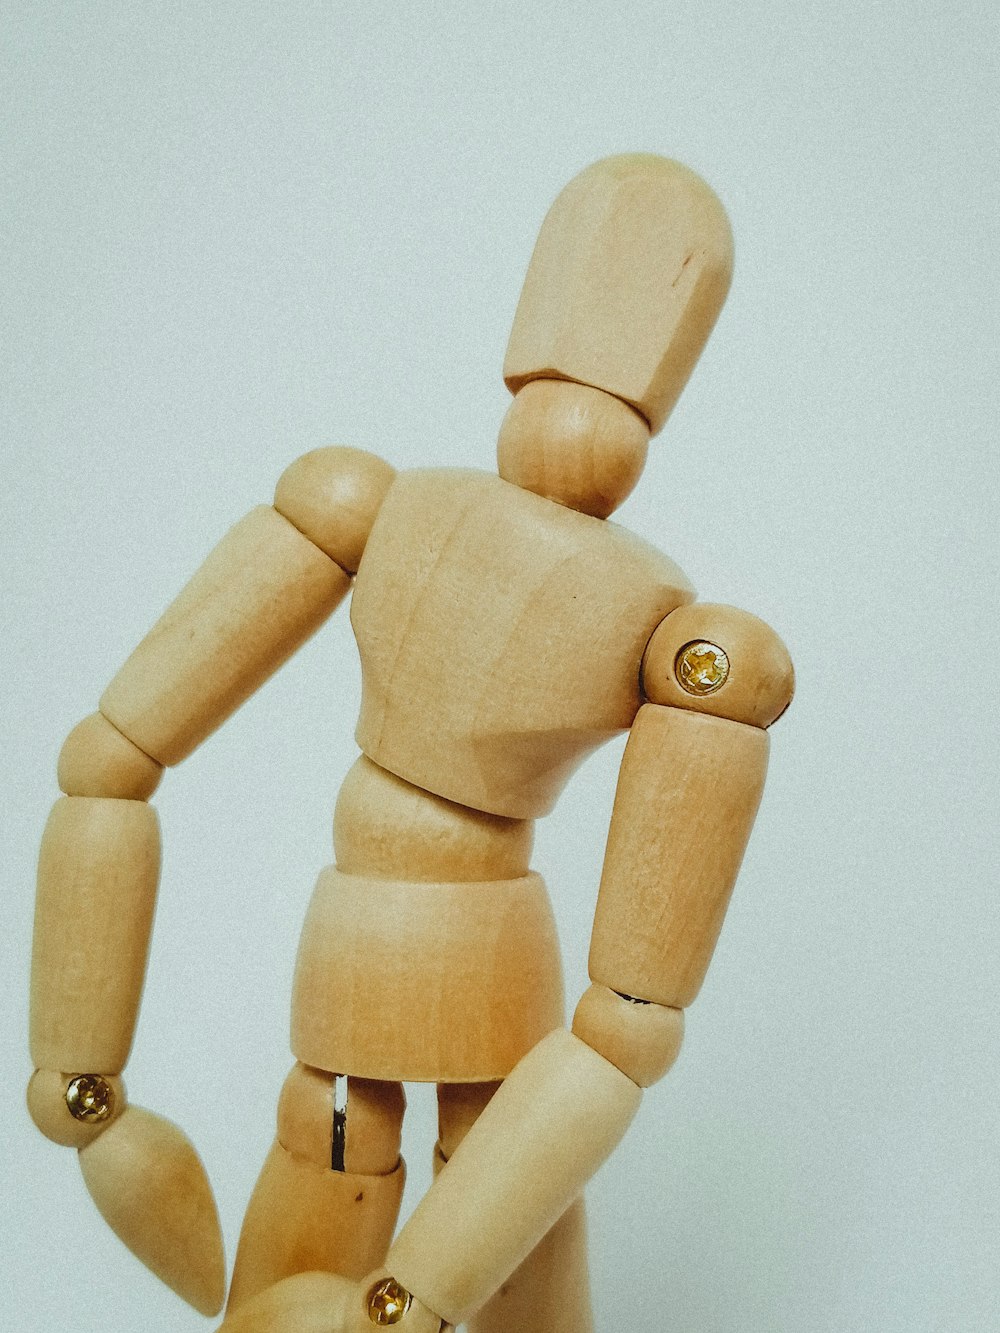 brown wooden human figure on white surface